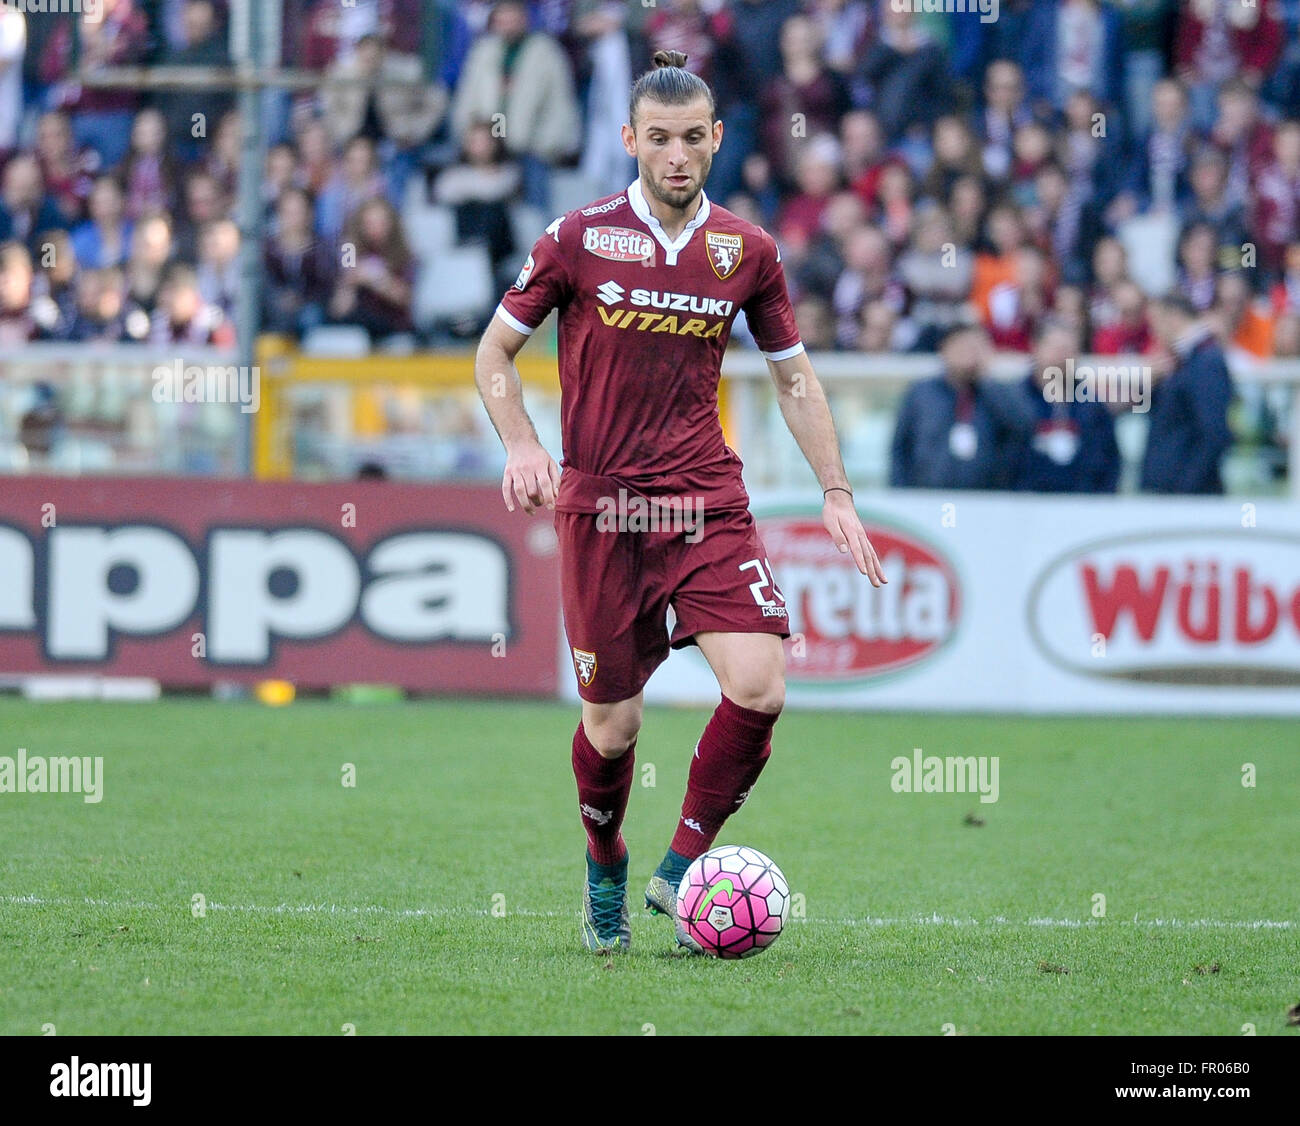 Turin, Italy. 20th Mar, 2016. Gaston Silva in action during the Serie A football match between Torino FC and Juventus FC at Olympic stadium in Turin, Italy. Juventus FC wins 4-1 over Torino FC. © Nicolò Campo/Pacific Press/Alamy Live News Stock Photo